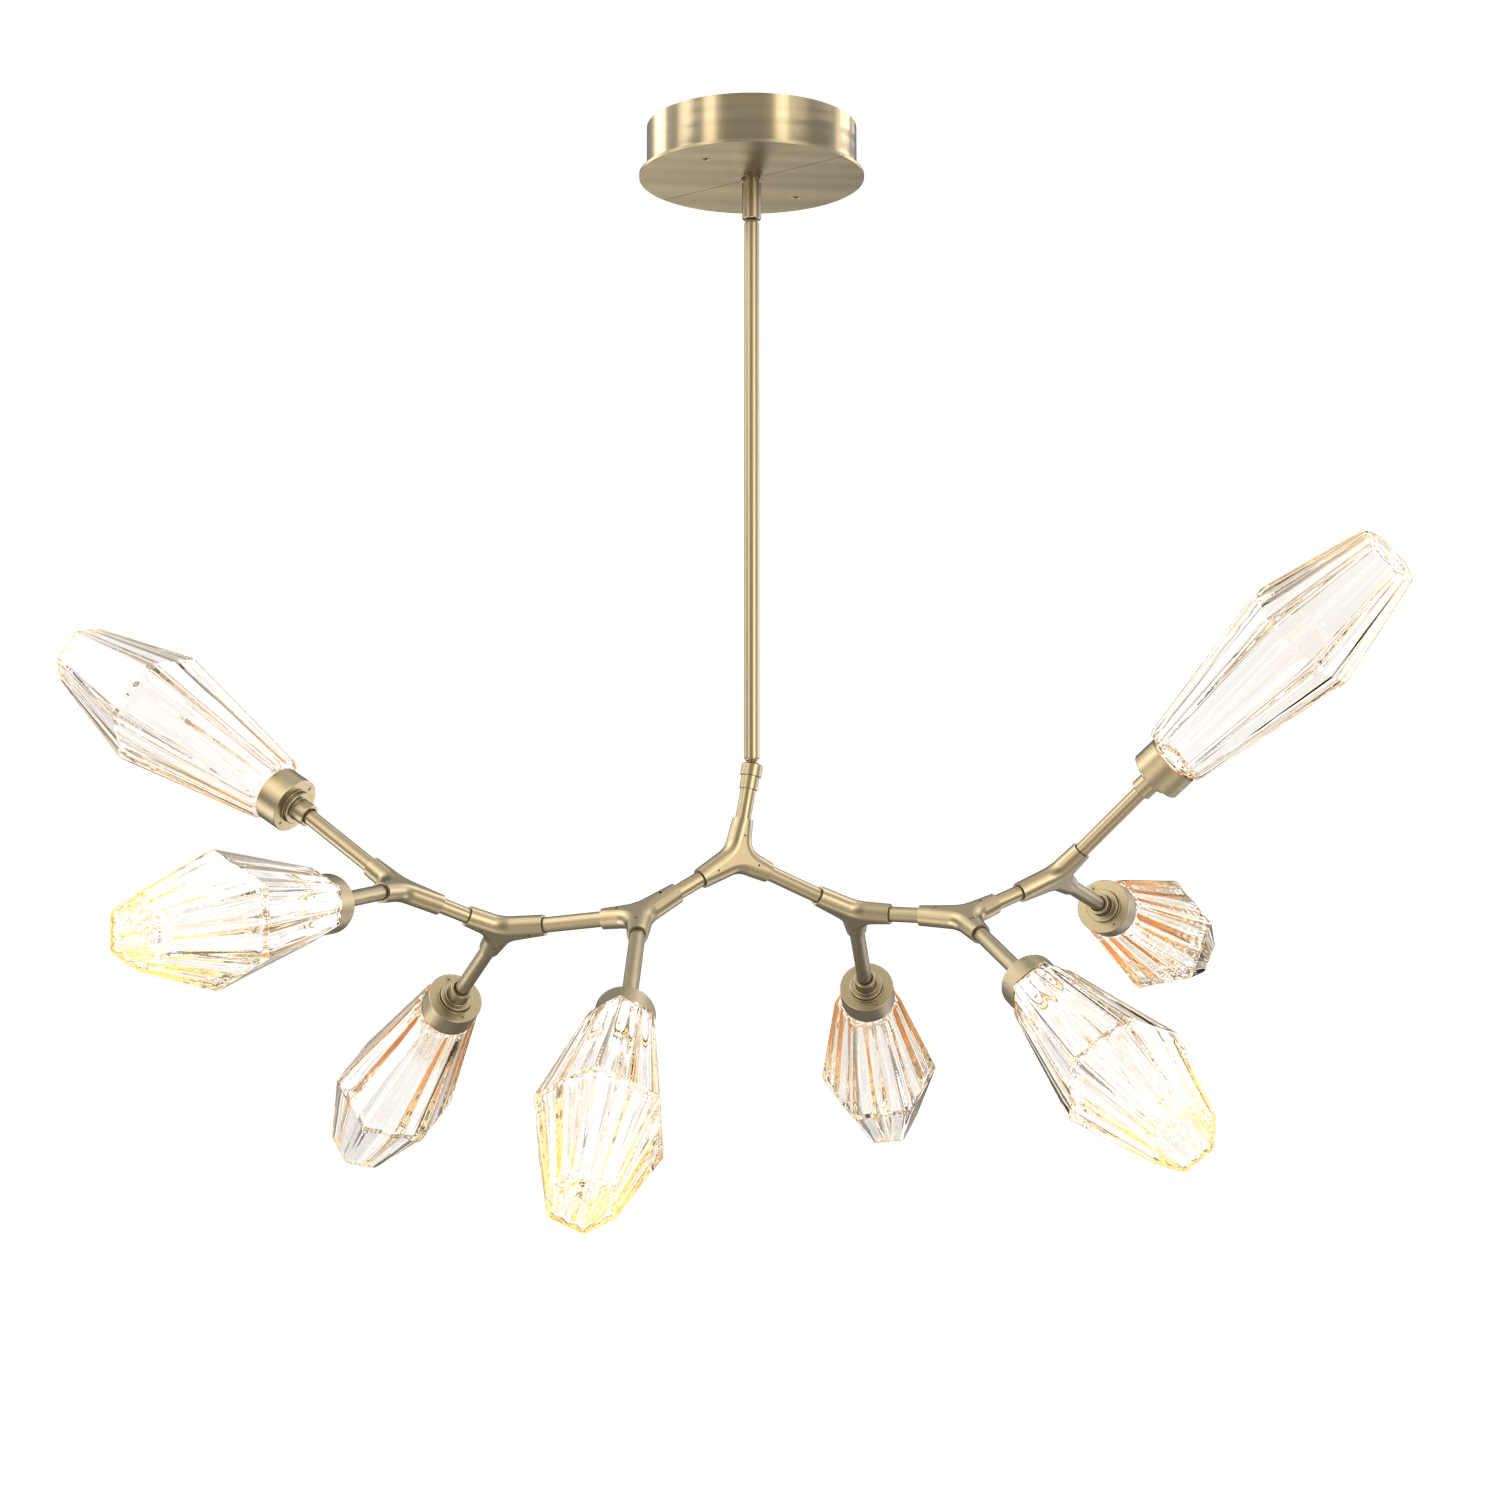 PLB0049-BB-HB-RA-Hammerton-Studio-Aalto-8-light-modern-branch-chandelier-with-heritage-brass-finish-and-optic-ribbed-amber-glass-shades-and-LED-lamping